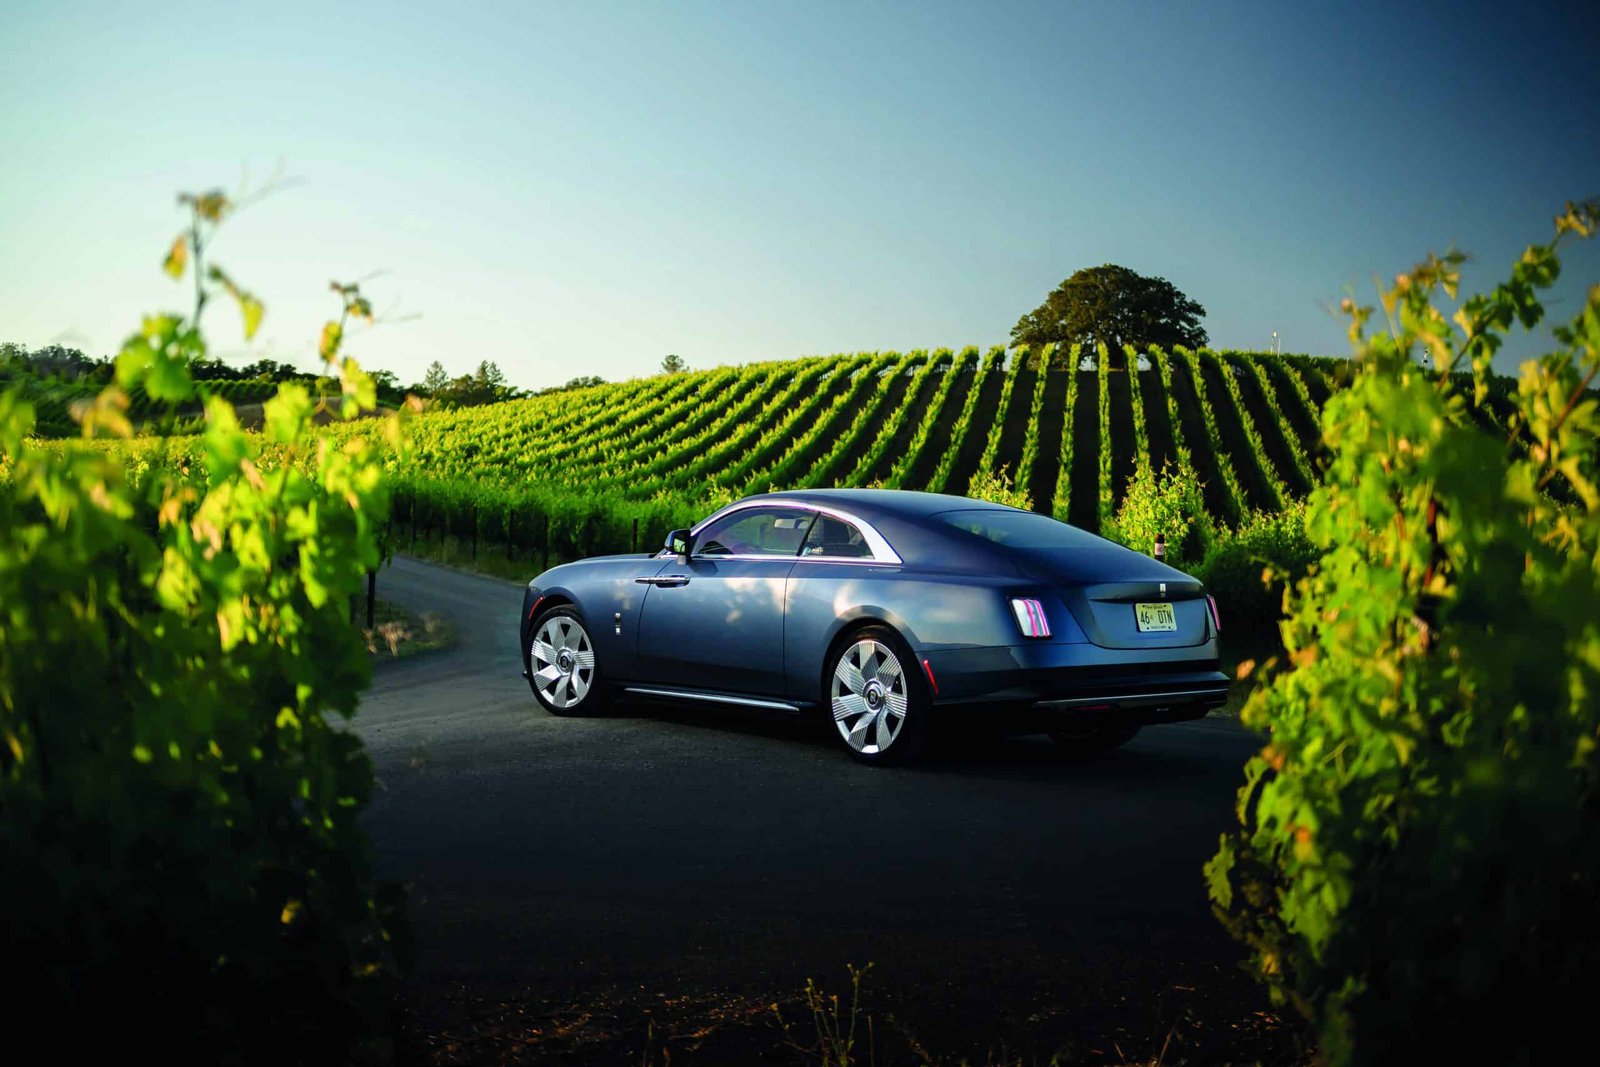 The Spectre of a Rolls Royce Wraith is driving down a road in a vineyard.